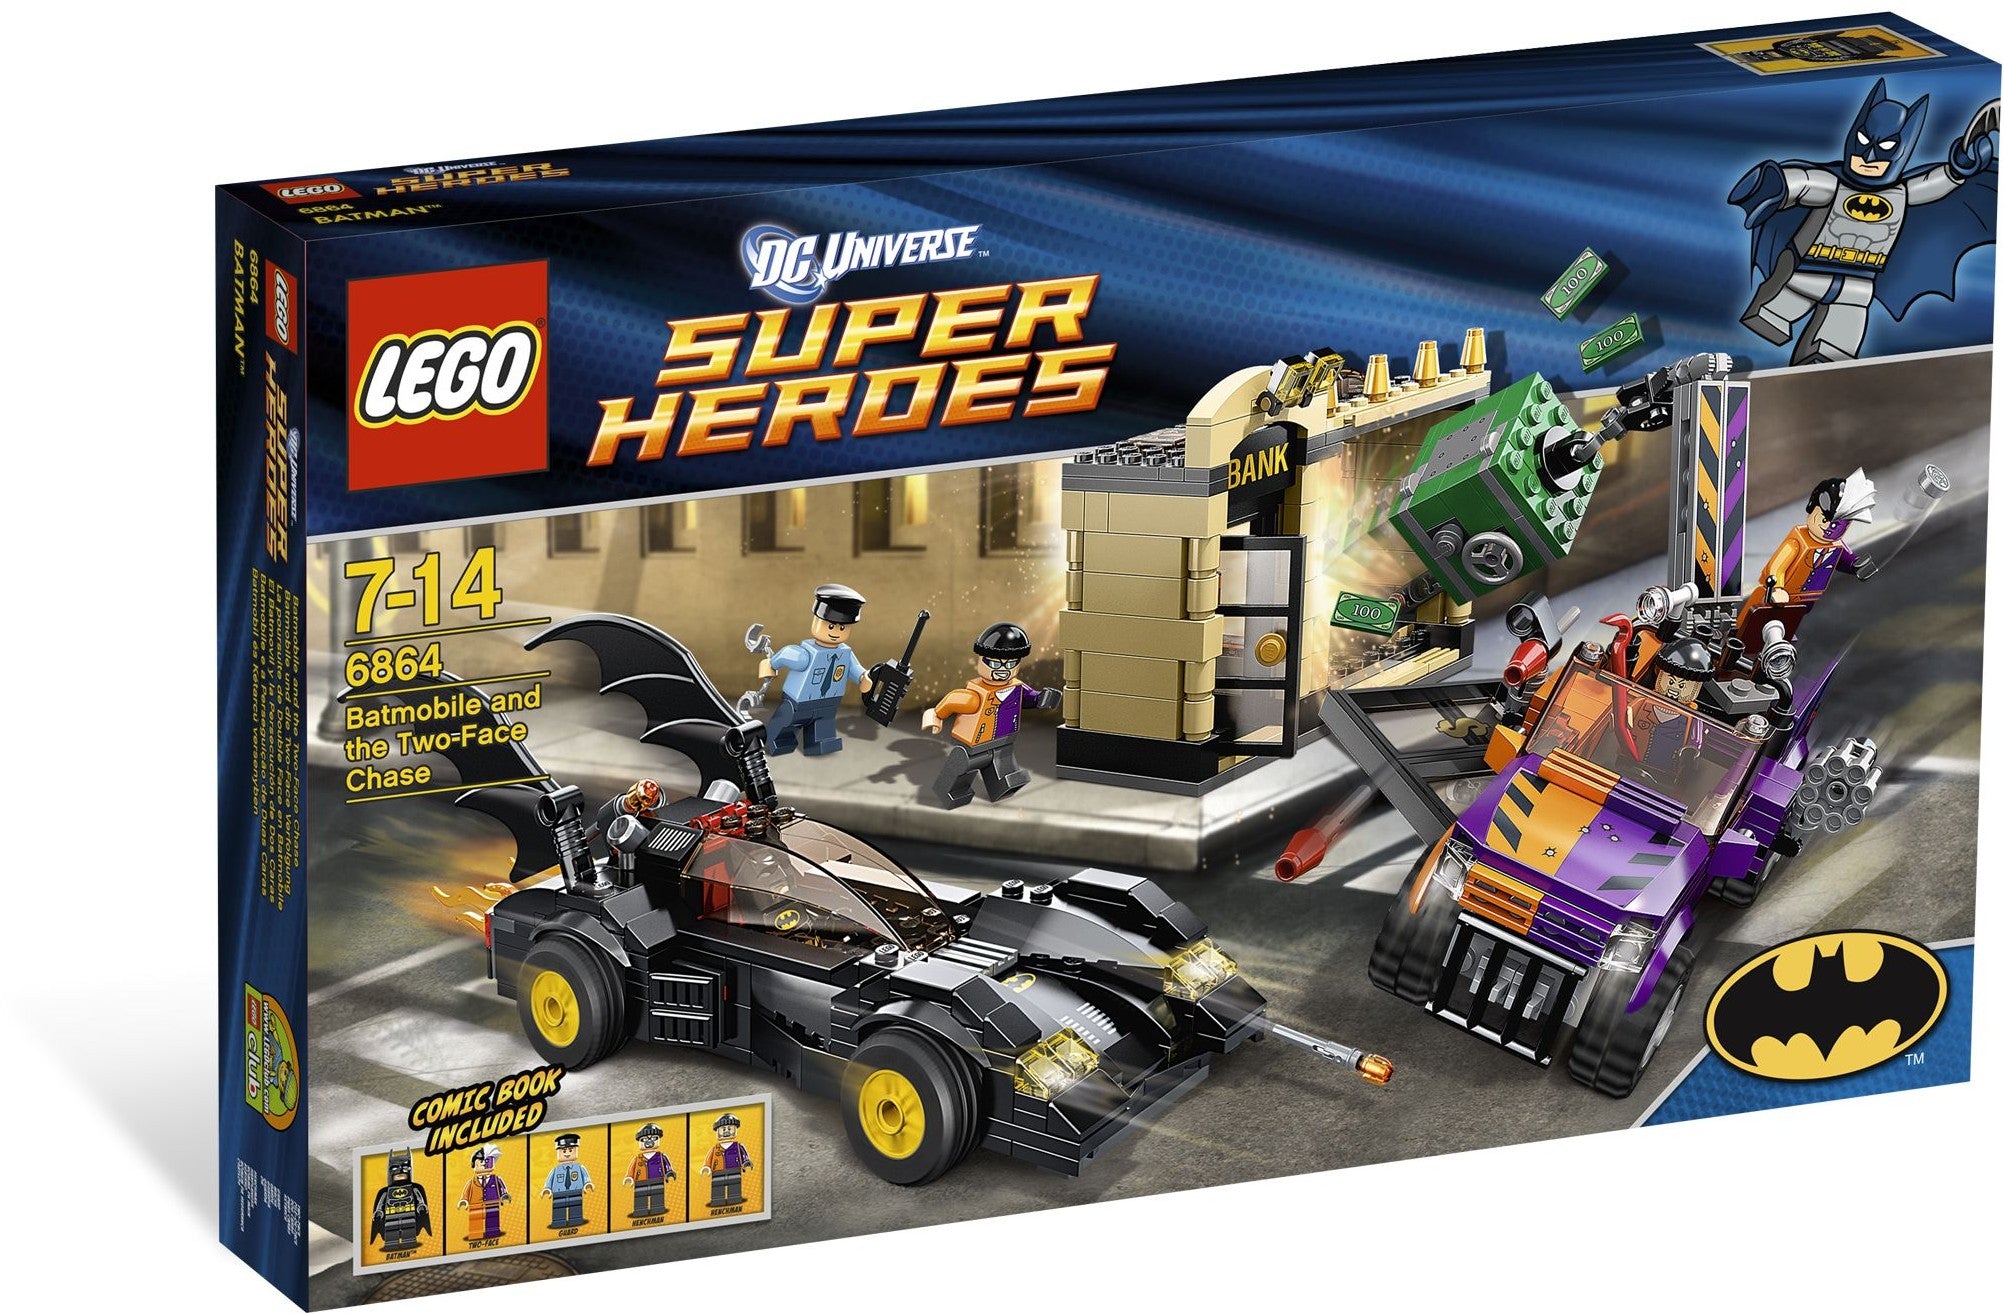 Lego Super Heroes 6864 - Batmobile and the Two-Face Chase